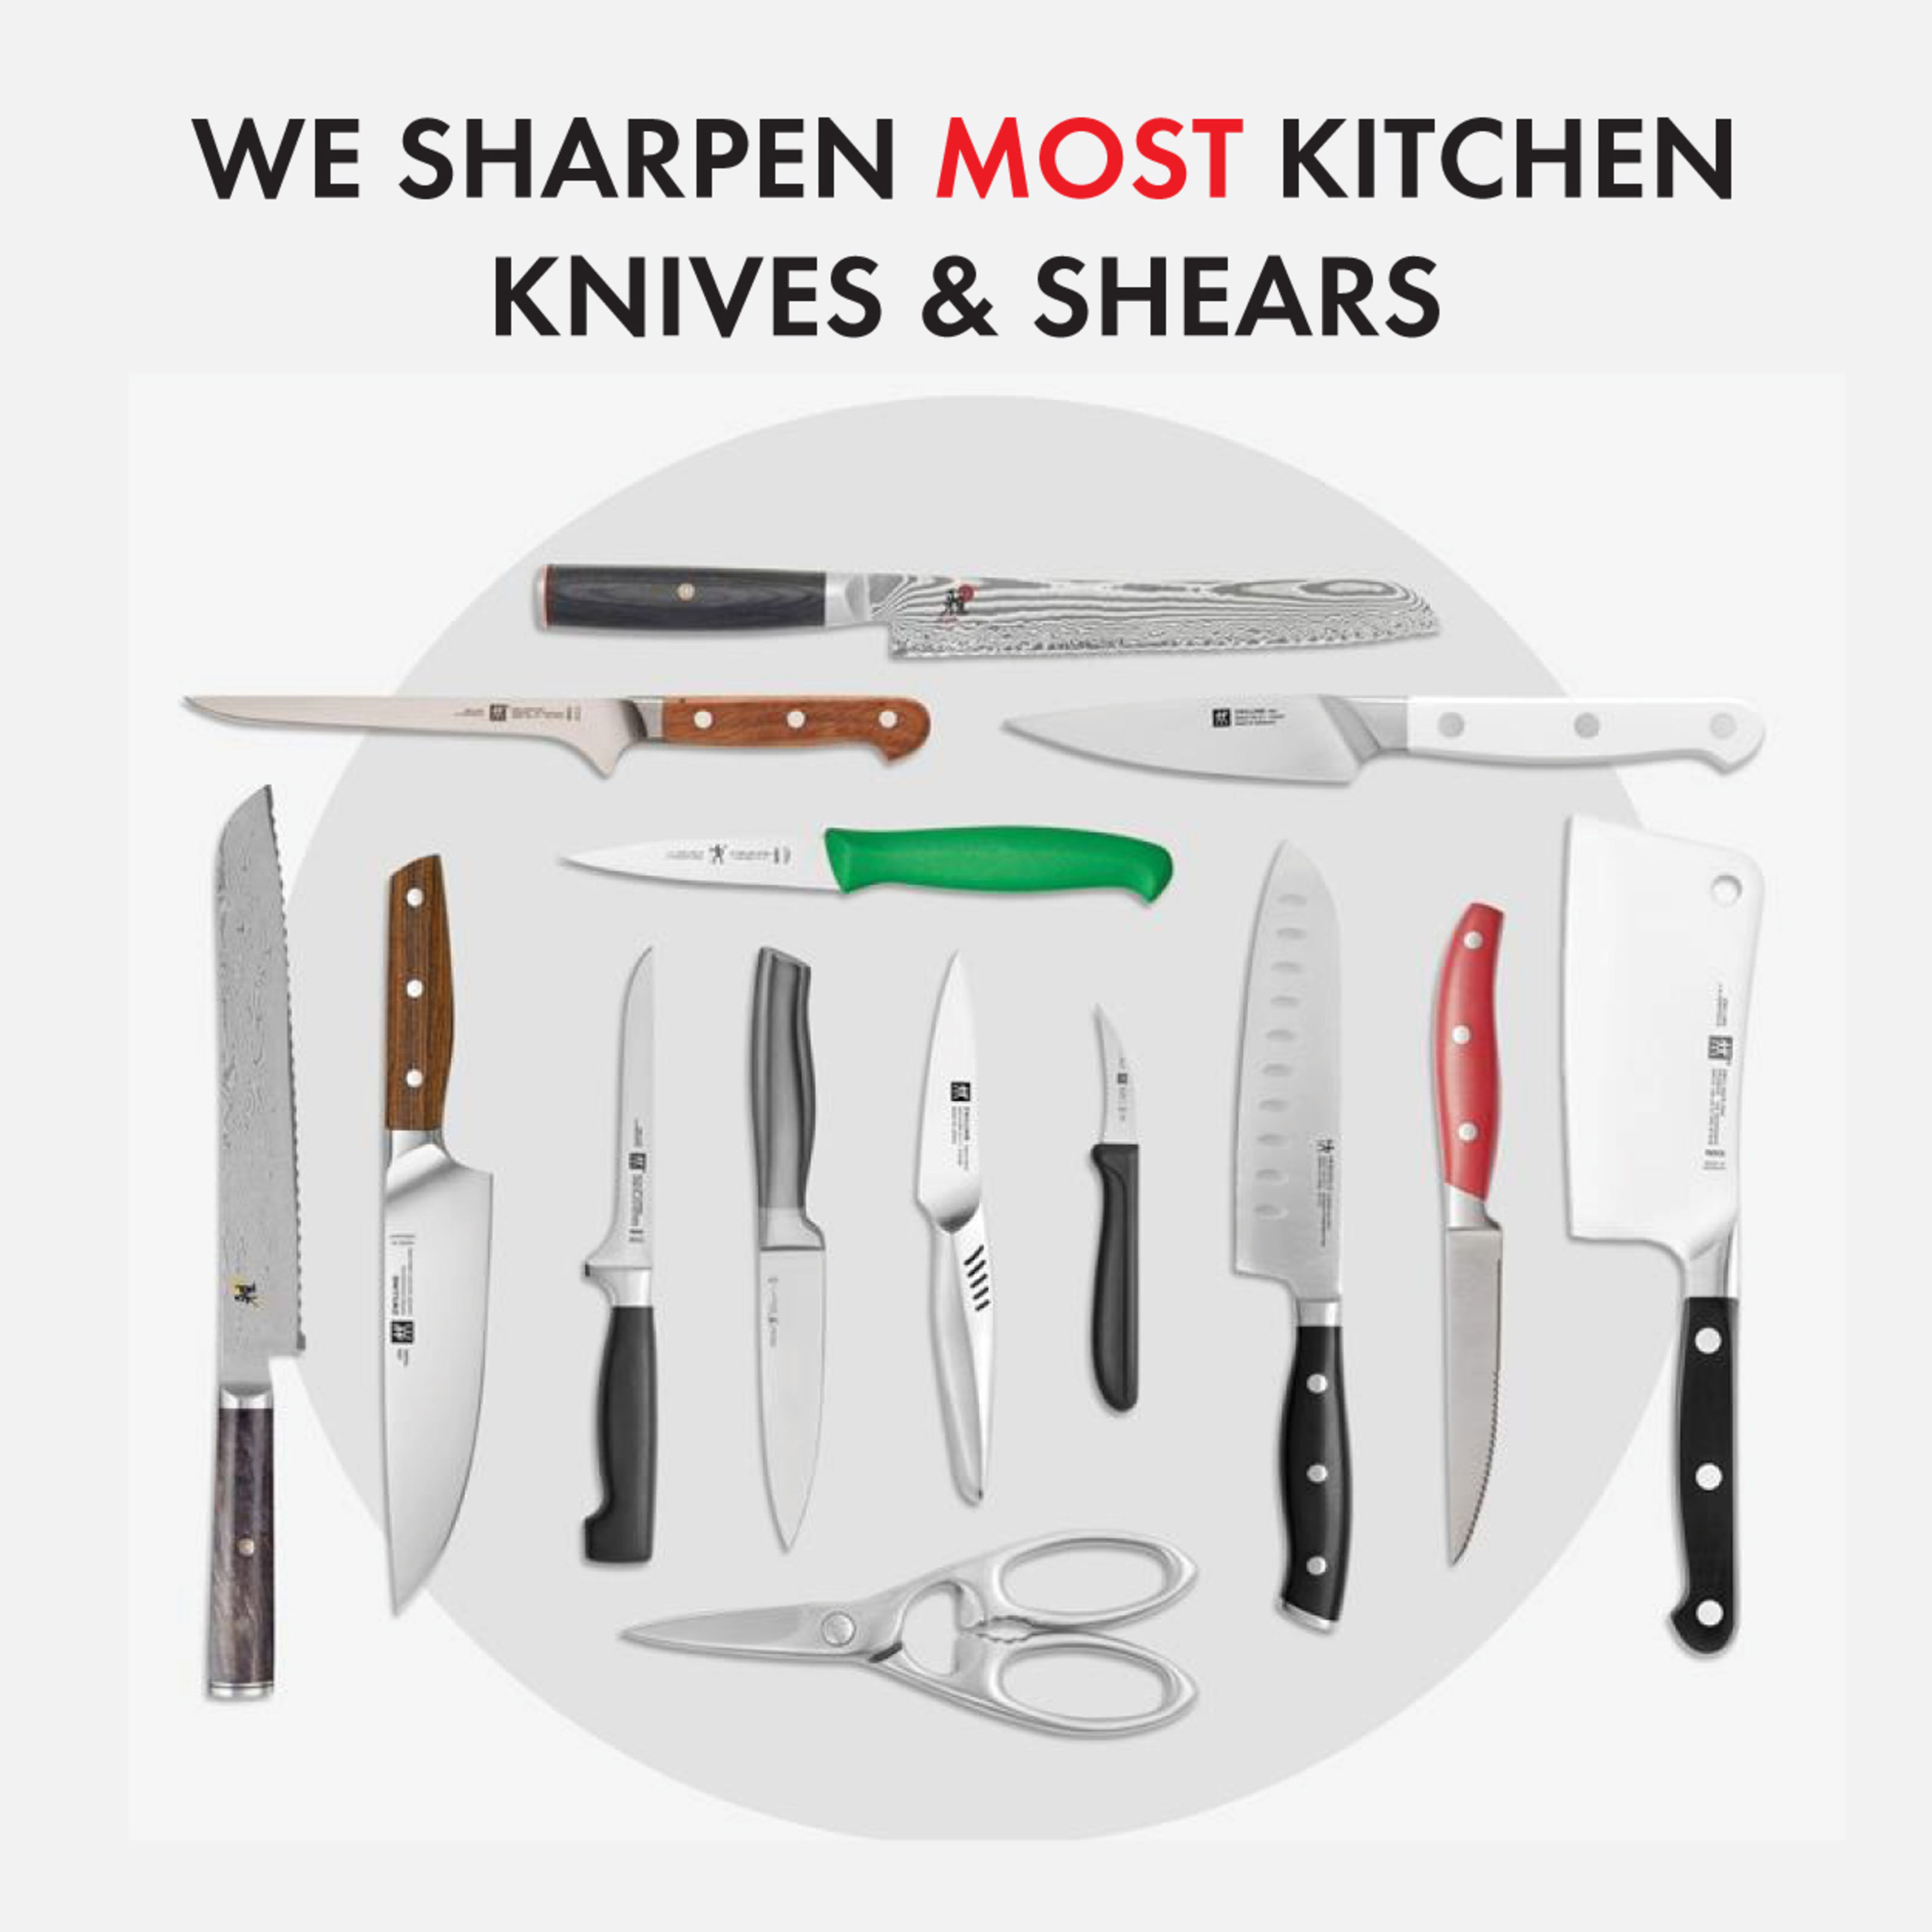 Knife Aid Professional Knife Sharpening by Mail, 5 Knives